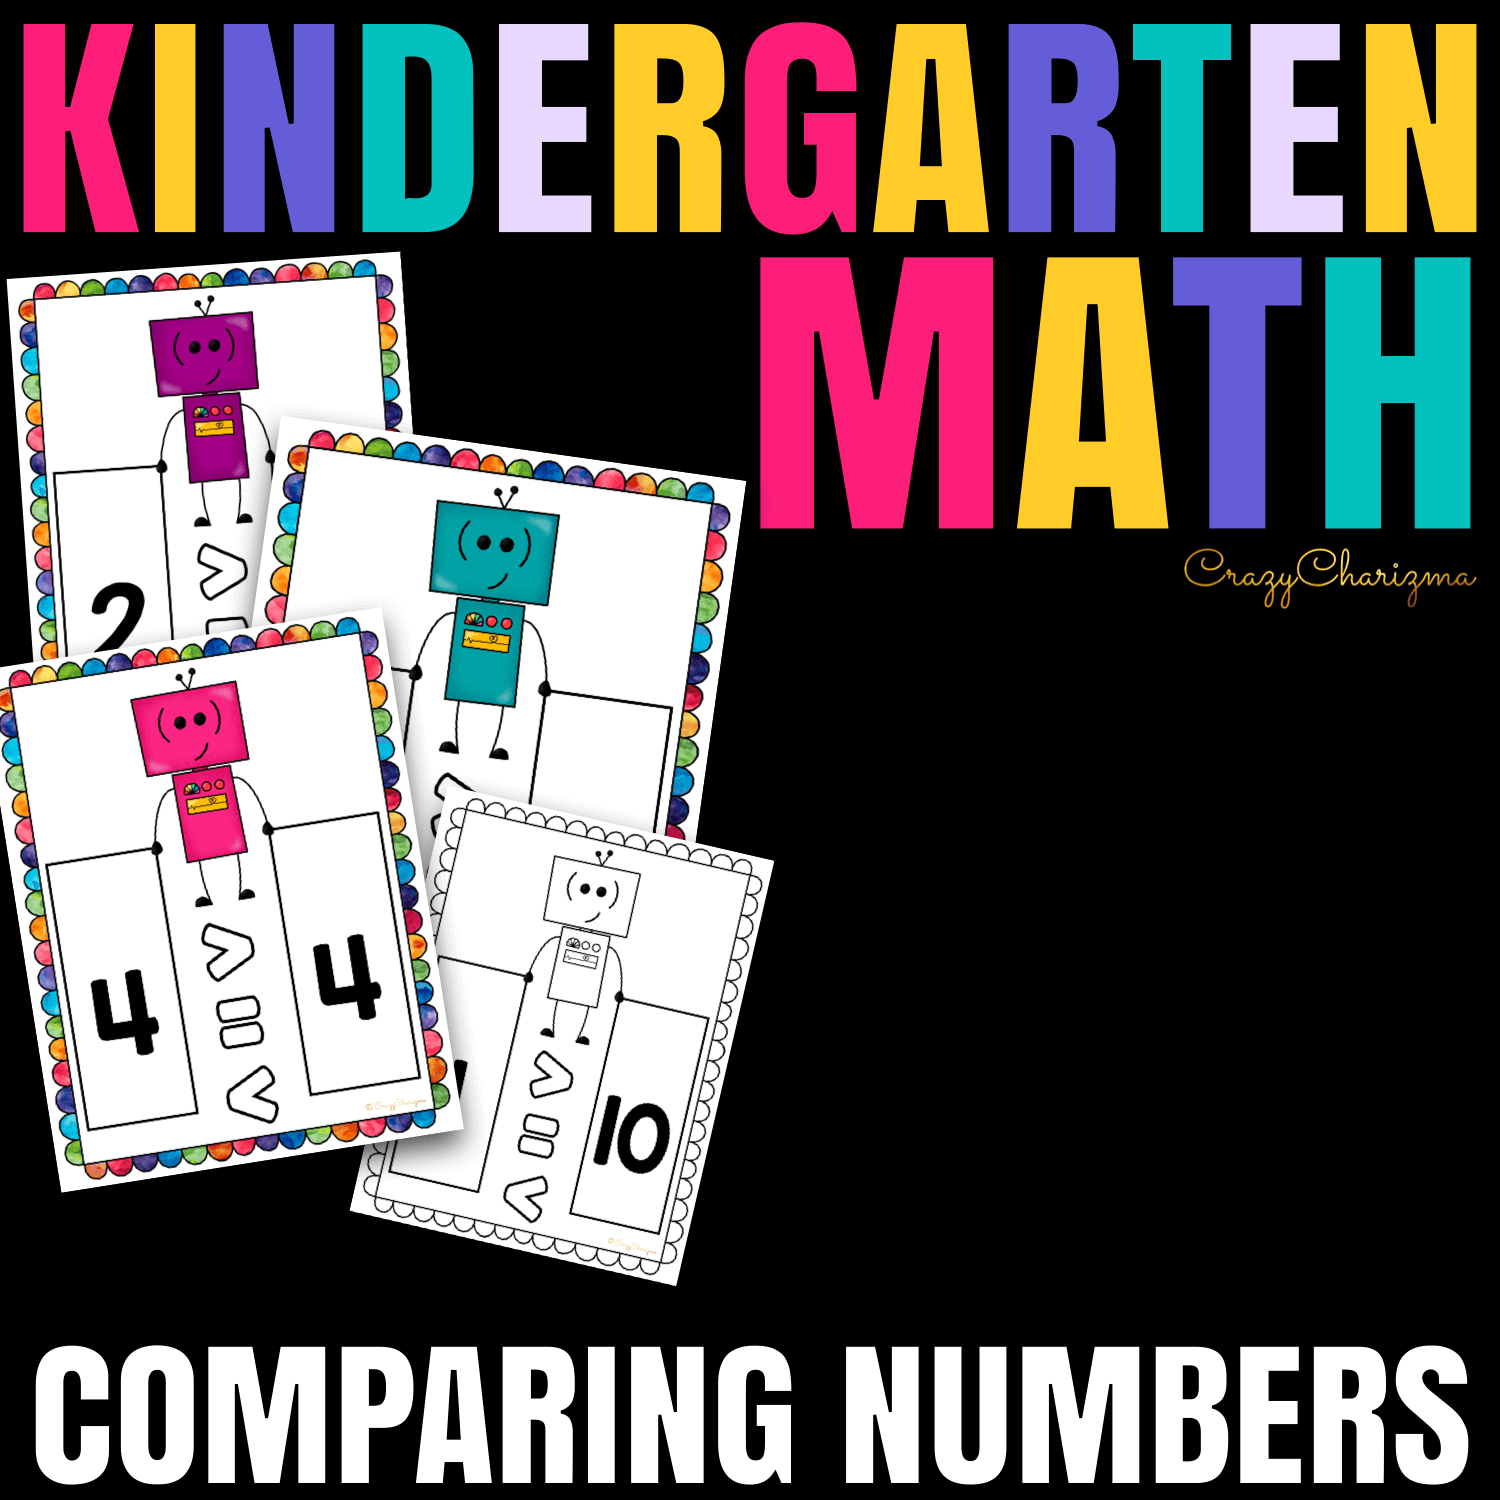 Practice comparing numbers to 10 with these bright and engaging math centers. A black and white version is also included.